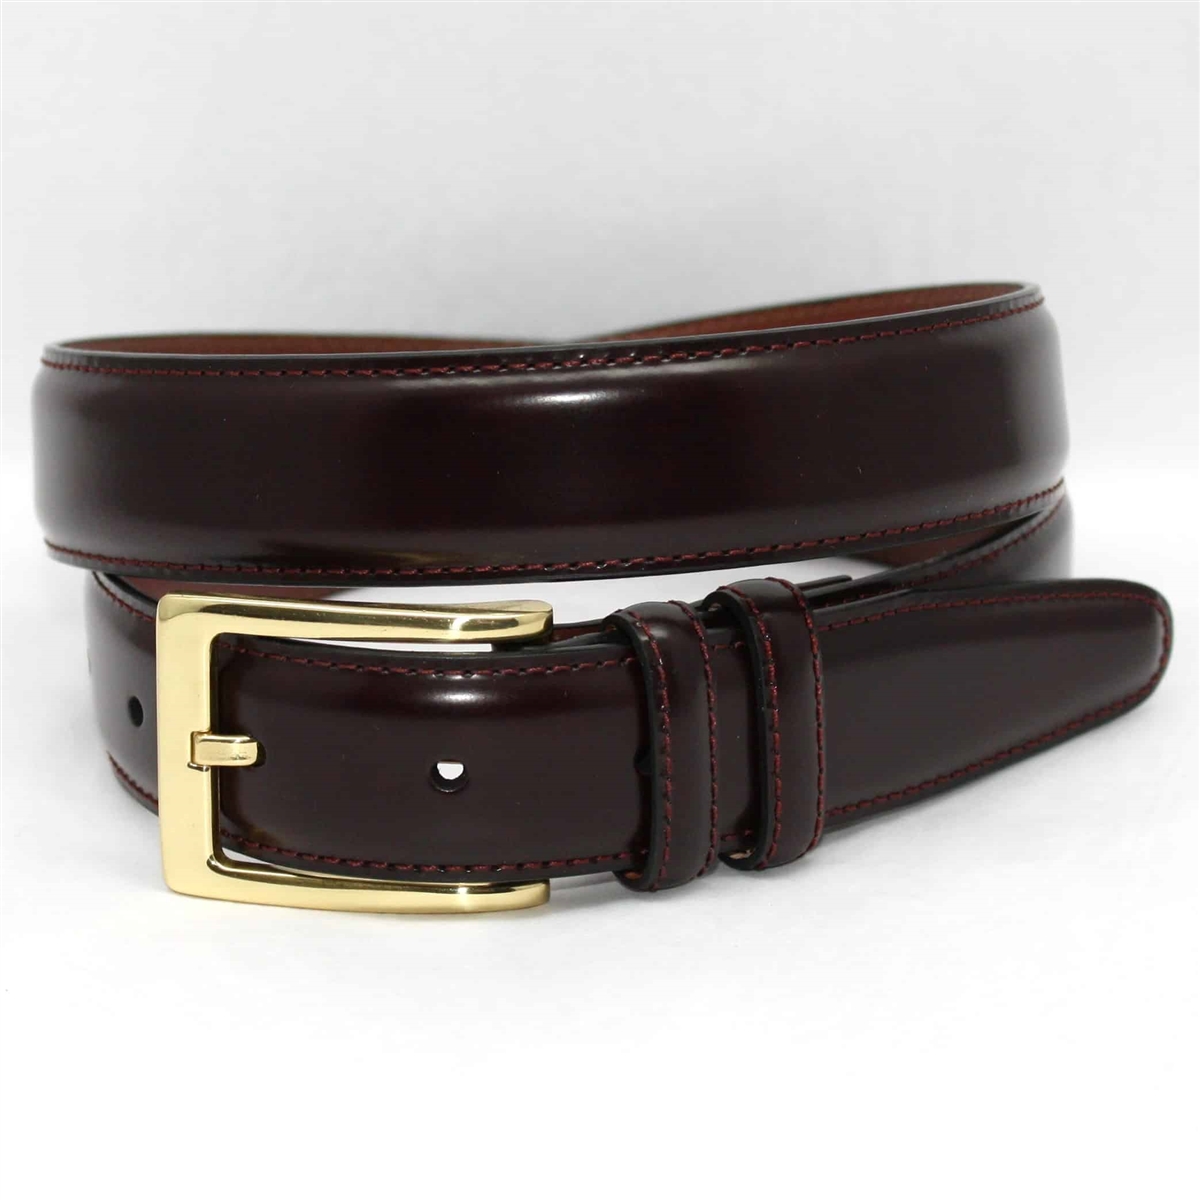 Antigua Leather Belt in Burgundy by Torino Leather Co. - Hansen's